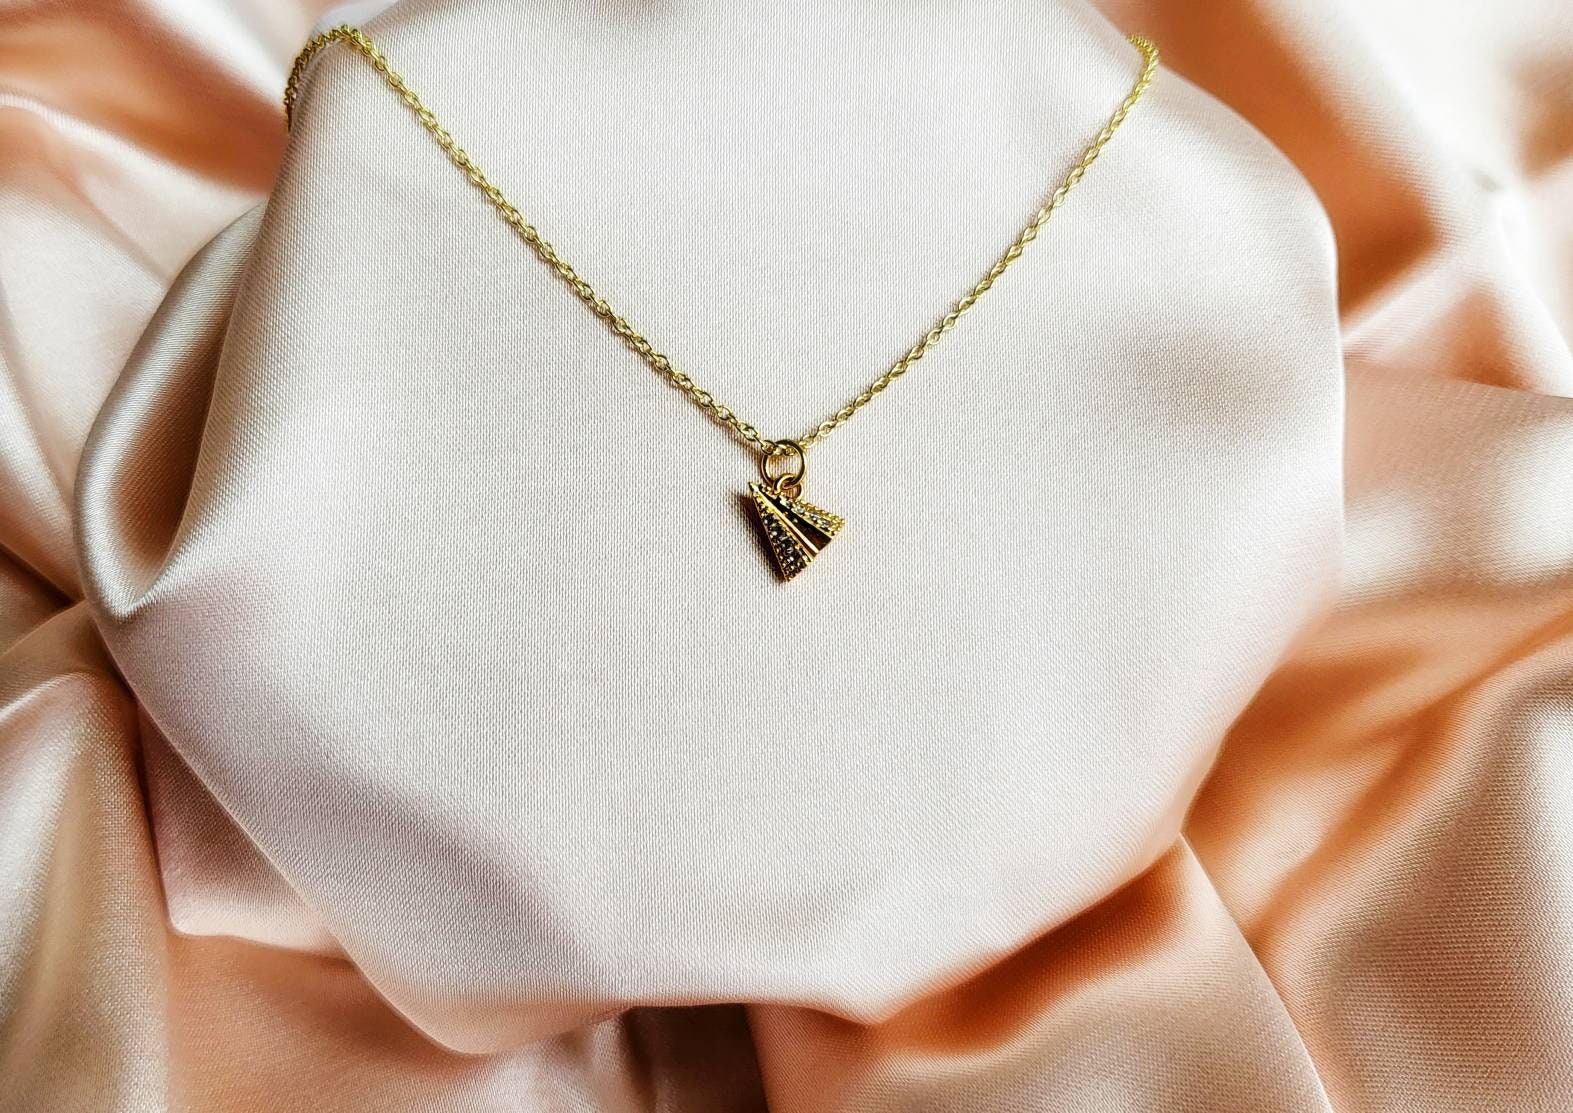 Gold Airplane Necklace  Wanderlust jewelry, Airplane necklace, Gift  necklace